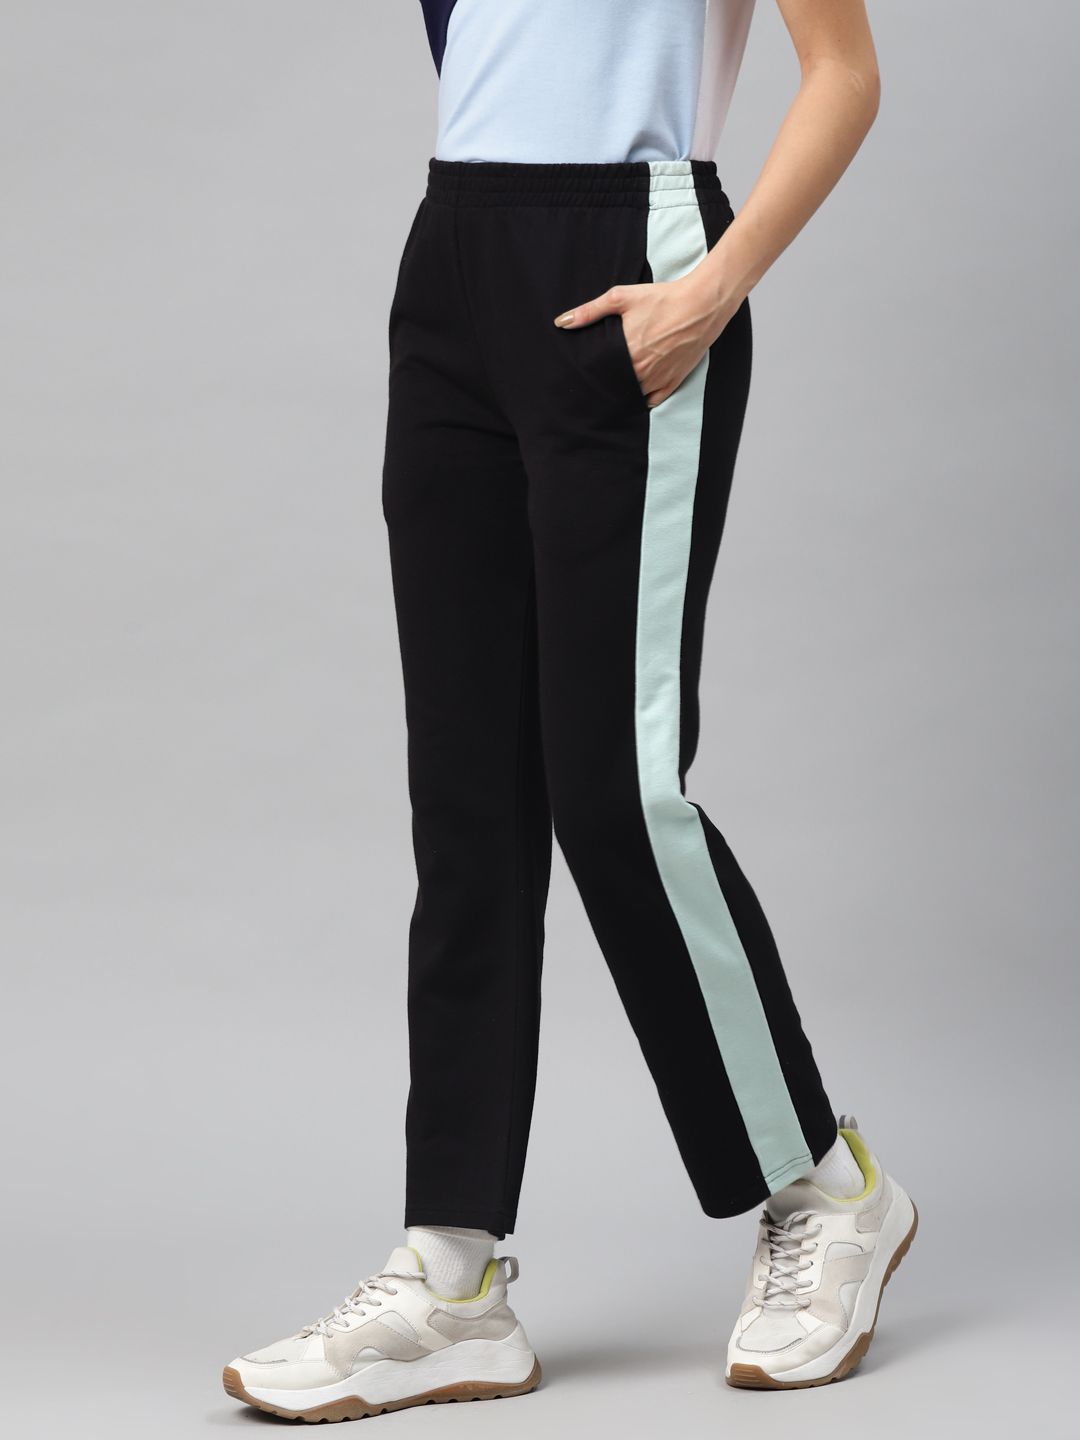 Laabha Women Black Solid Track Pants with Side Strip Price in India